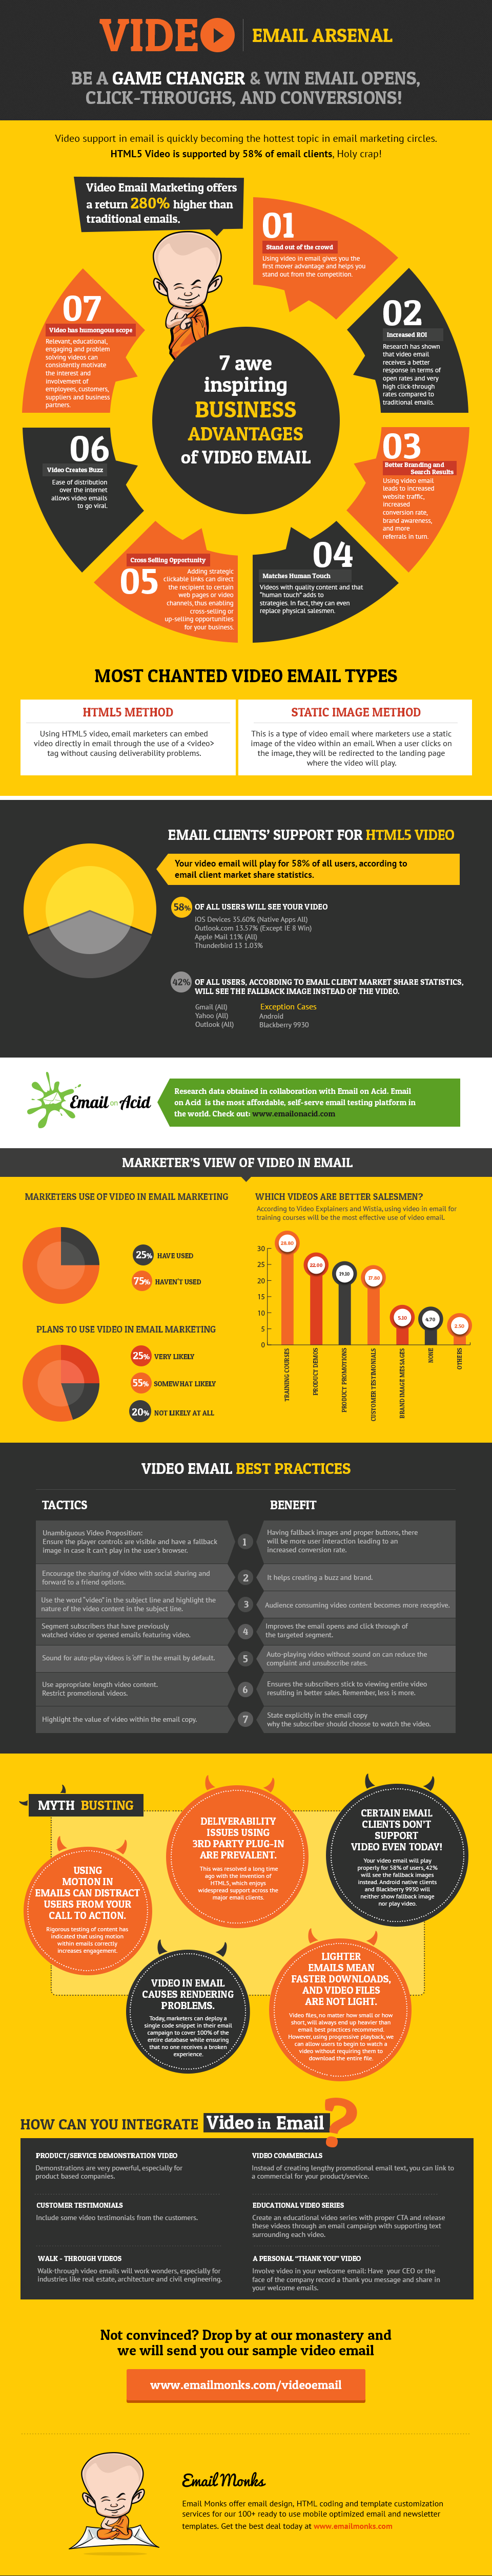 video-email-infographic